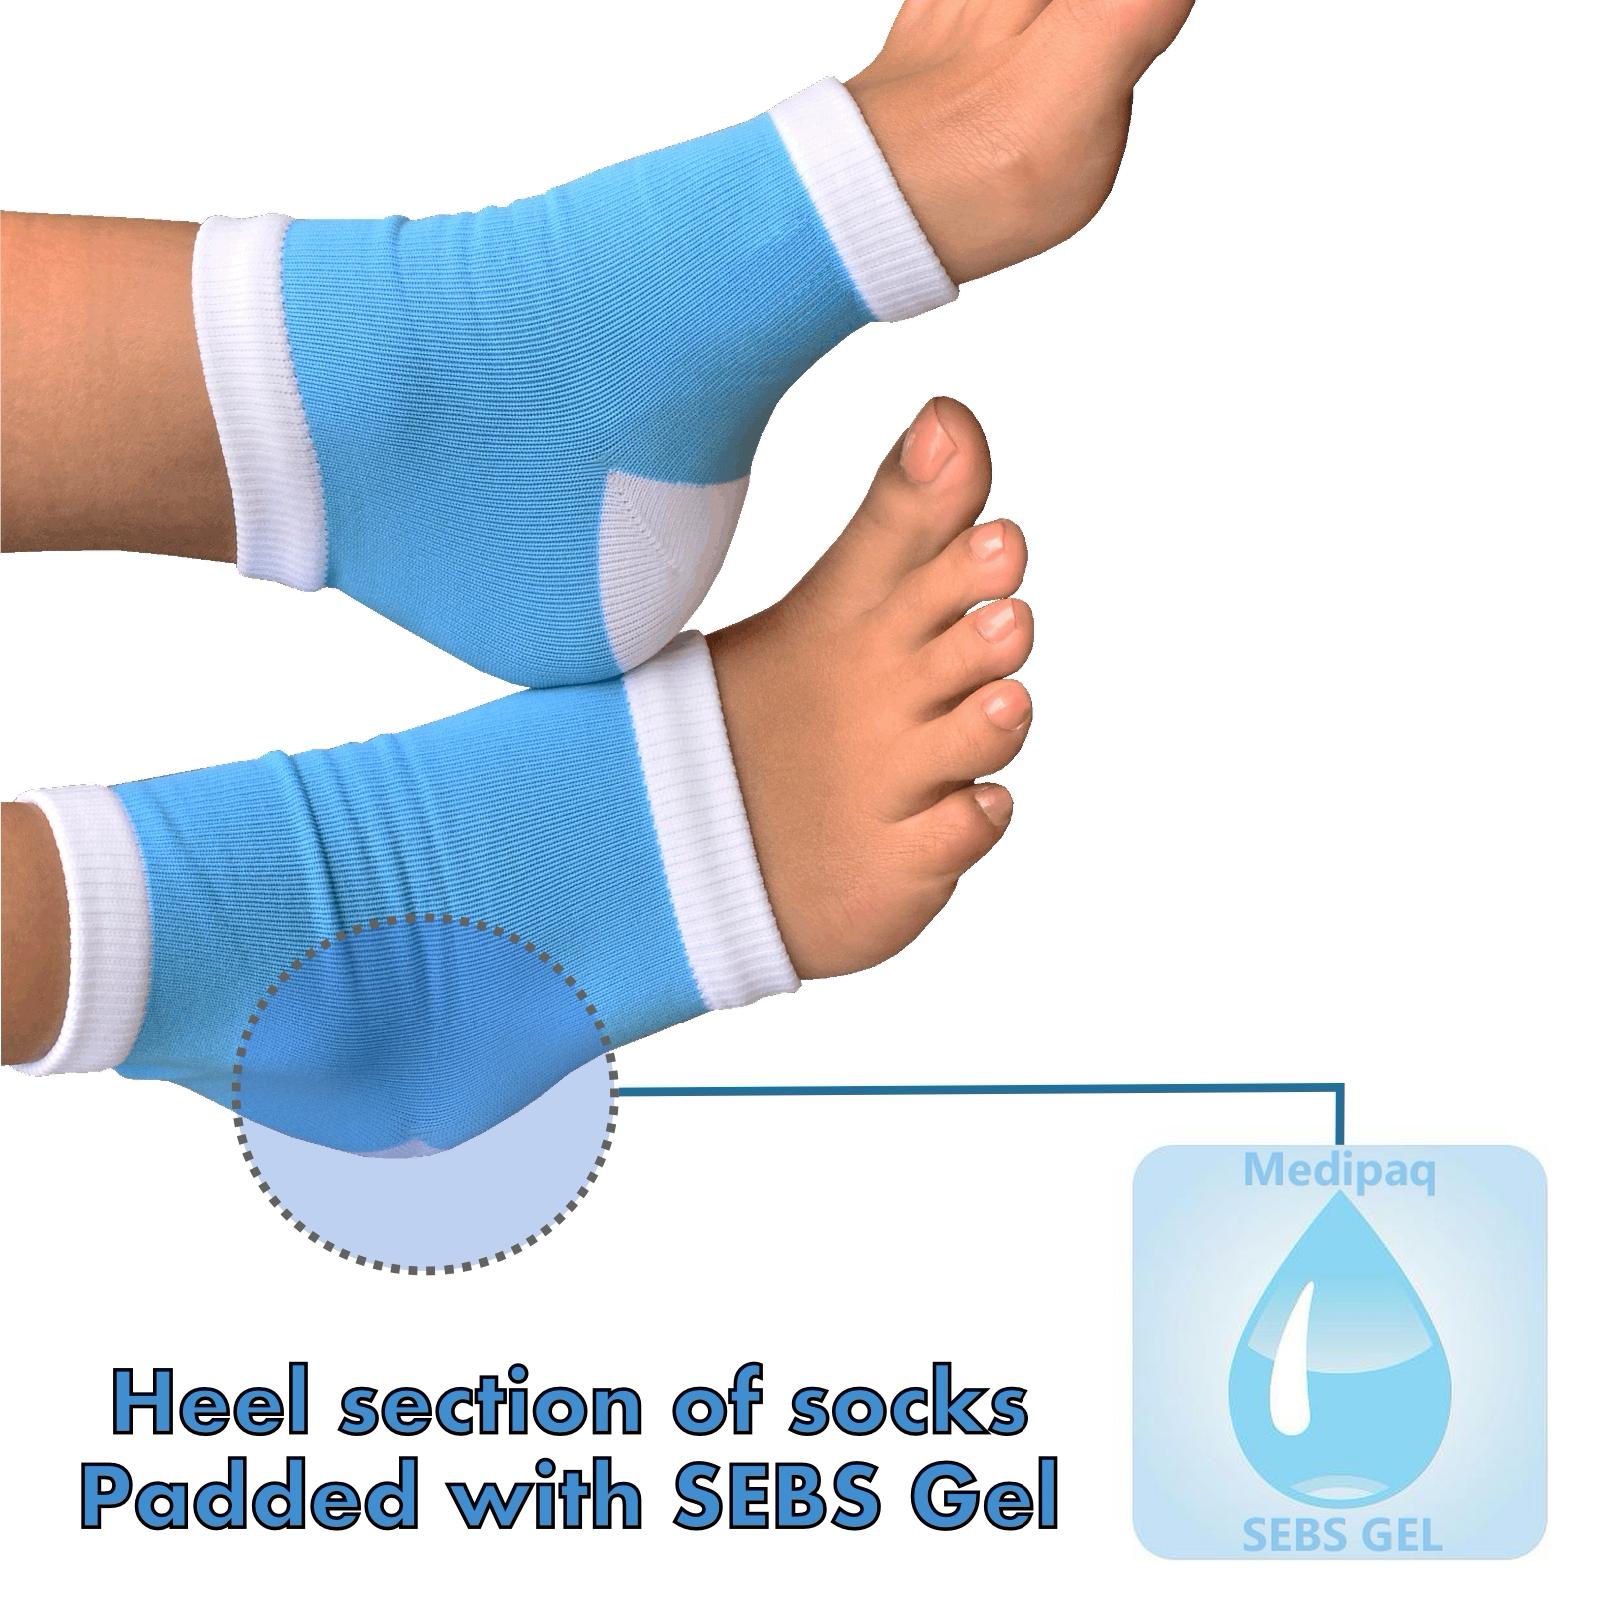 Recovery Gel Heel Socks - No More Friction!